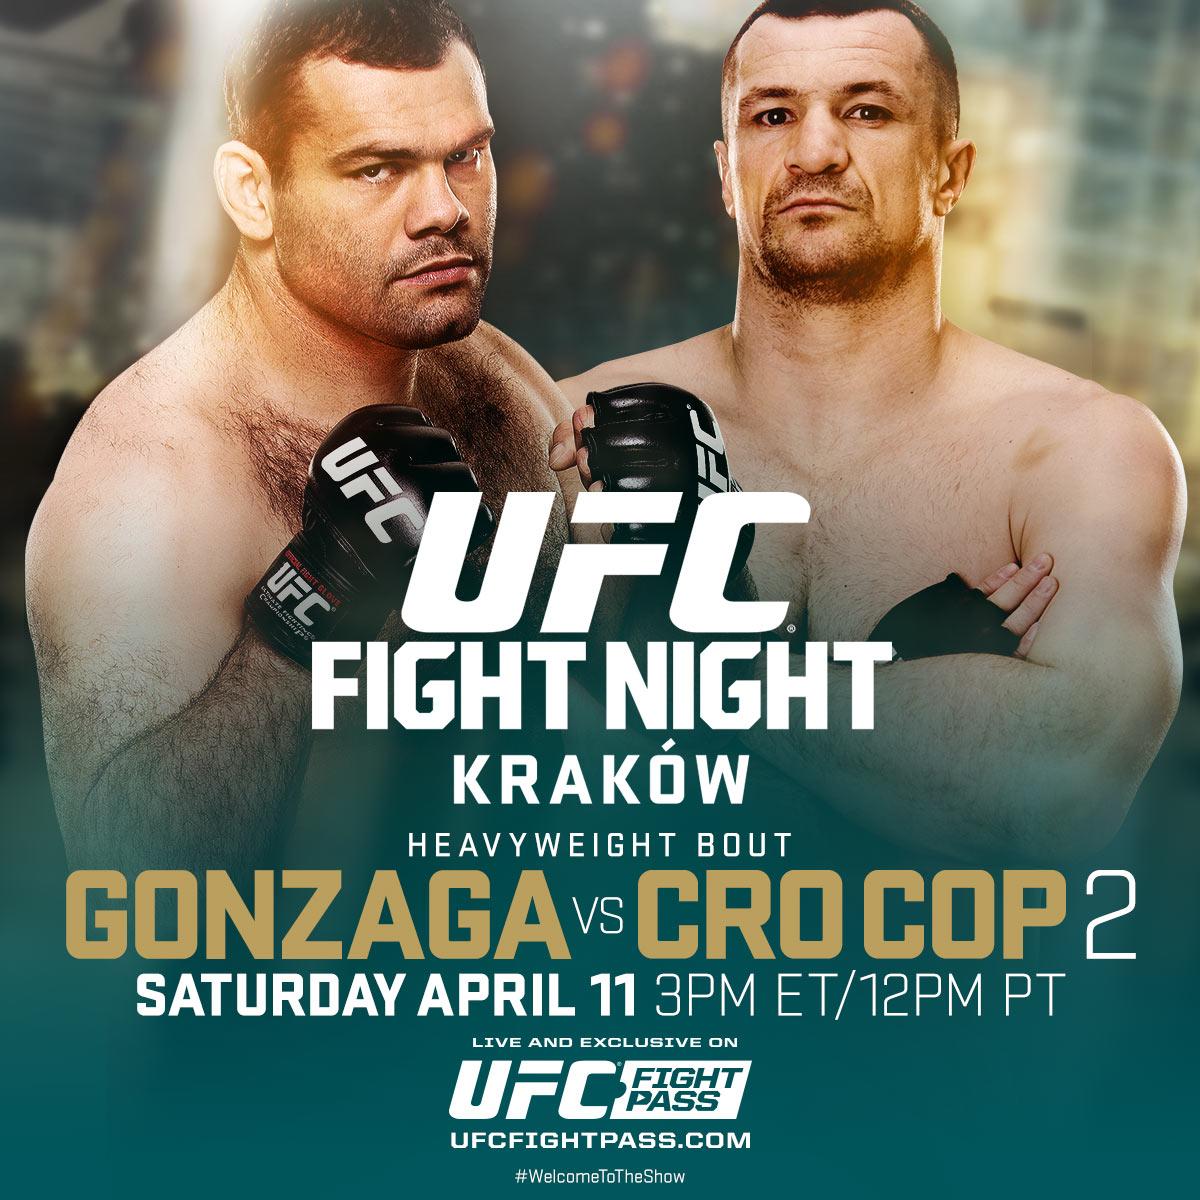 Forføre medlem Slør UFC FIGHT PASS on Twitter: "Sign-up for your 7-Day FREE trial to # UFCFIGHTPASS and catch #UFCKrakow LIVE this Saturday!  http://t.co/r0HFwxDSTn http://t.co/Befd8PwLvC" / Twitter